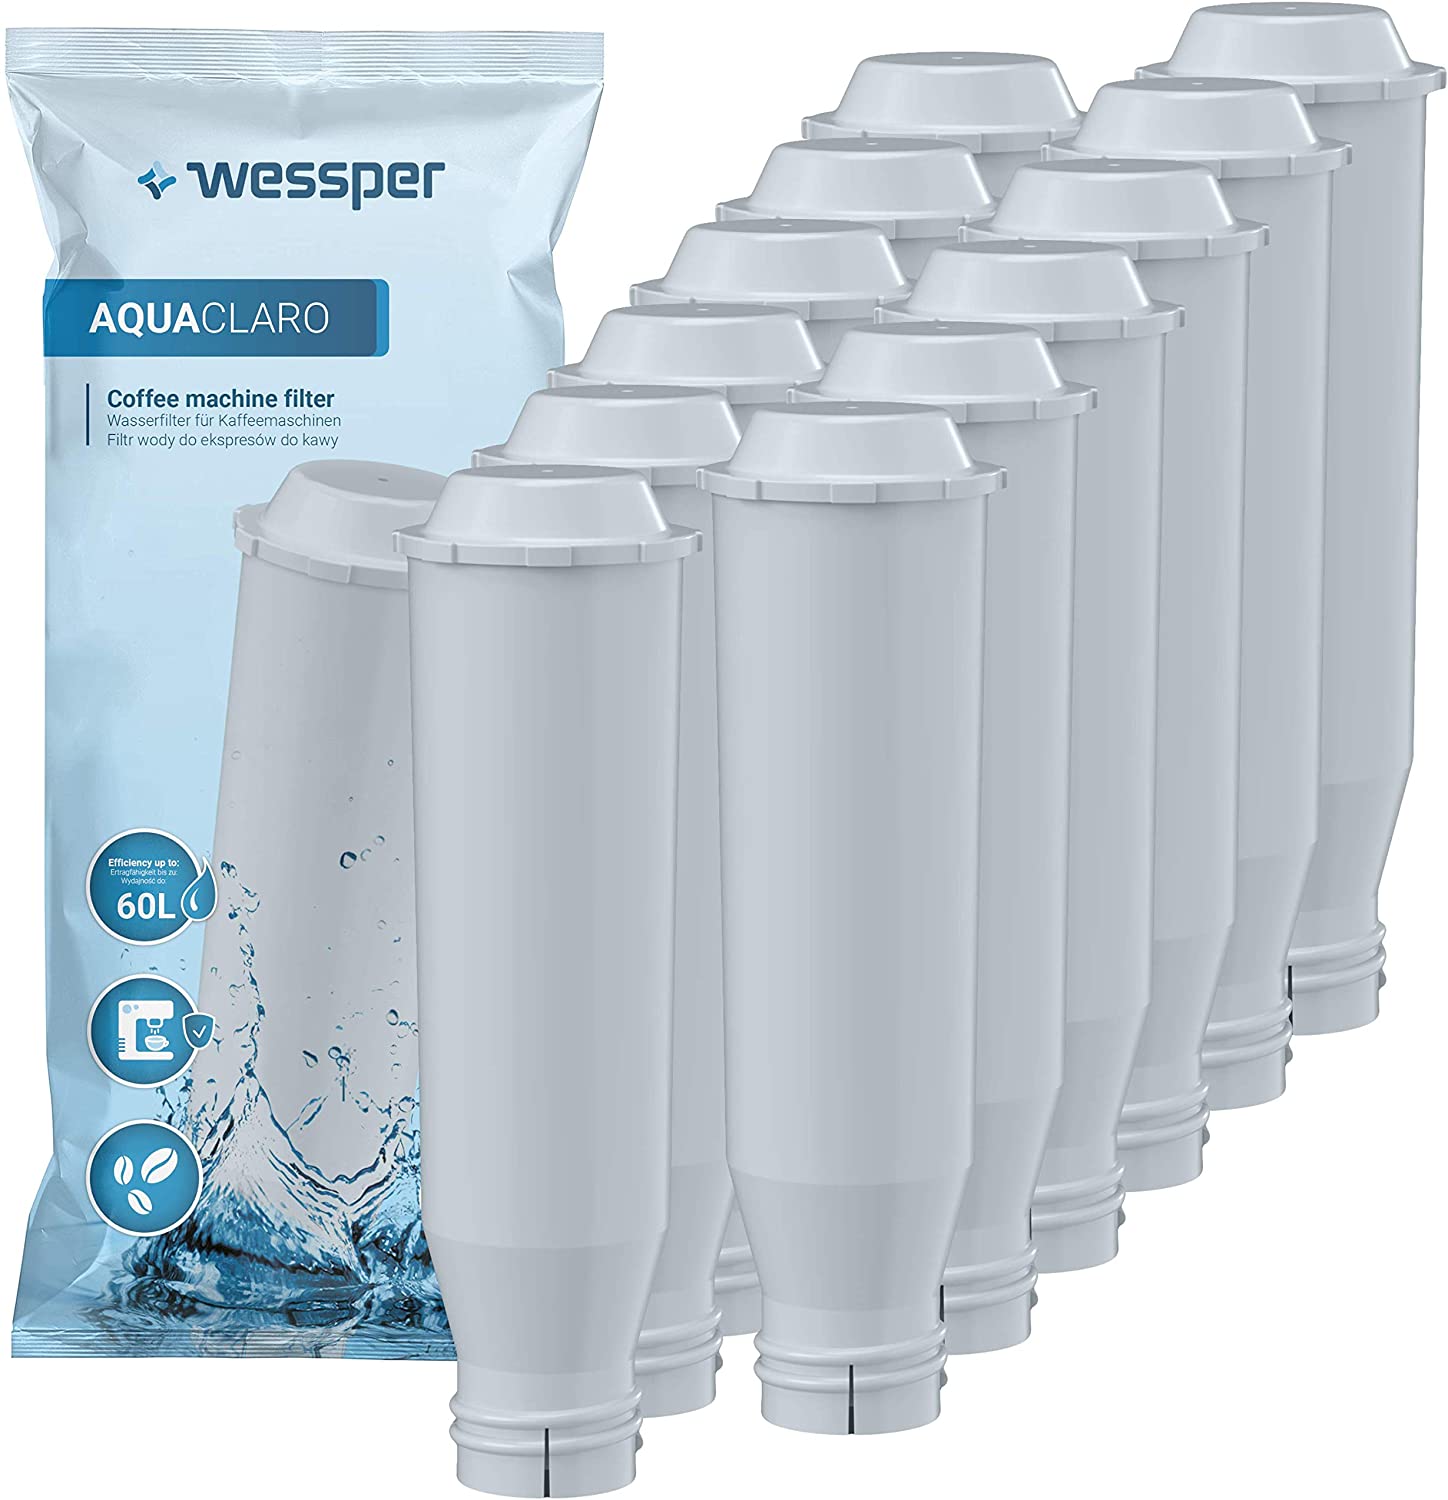 Wessper Water Filter Compatible with Krups Claris F088 F 088, Fits Many Models from Krups, Siemens, Bosch, AEG, Tefal, Neff, Gaggenau (Pack of 12)